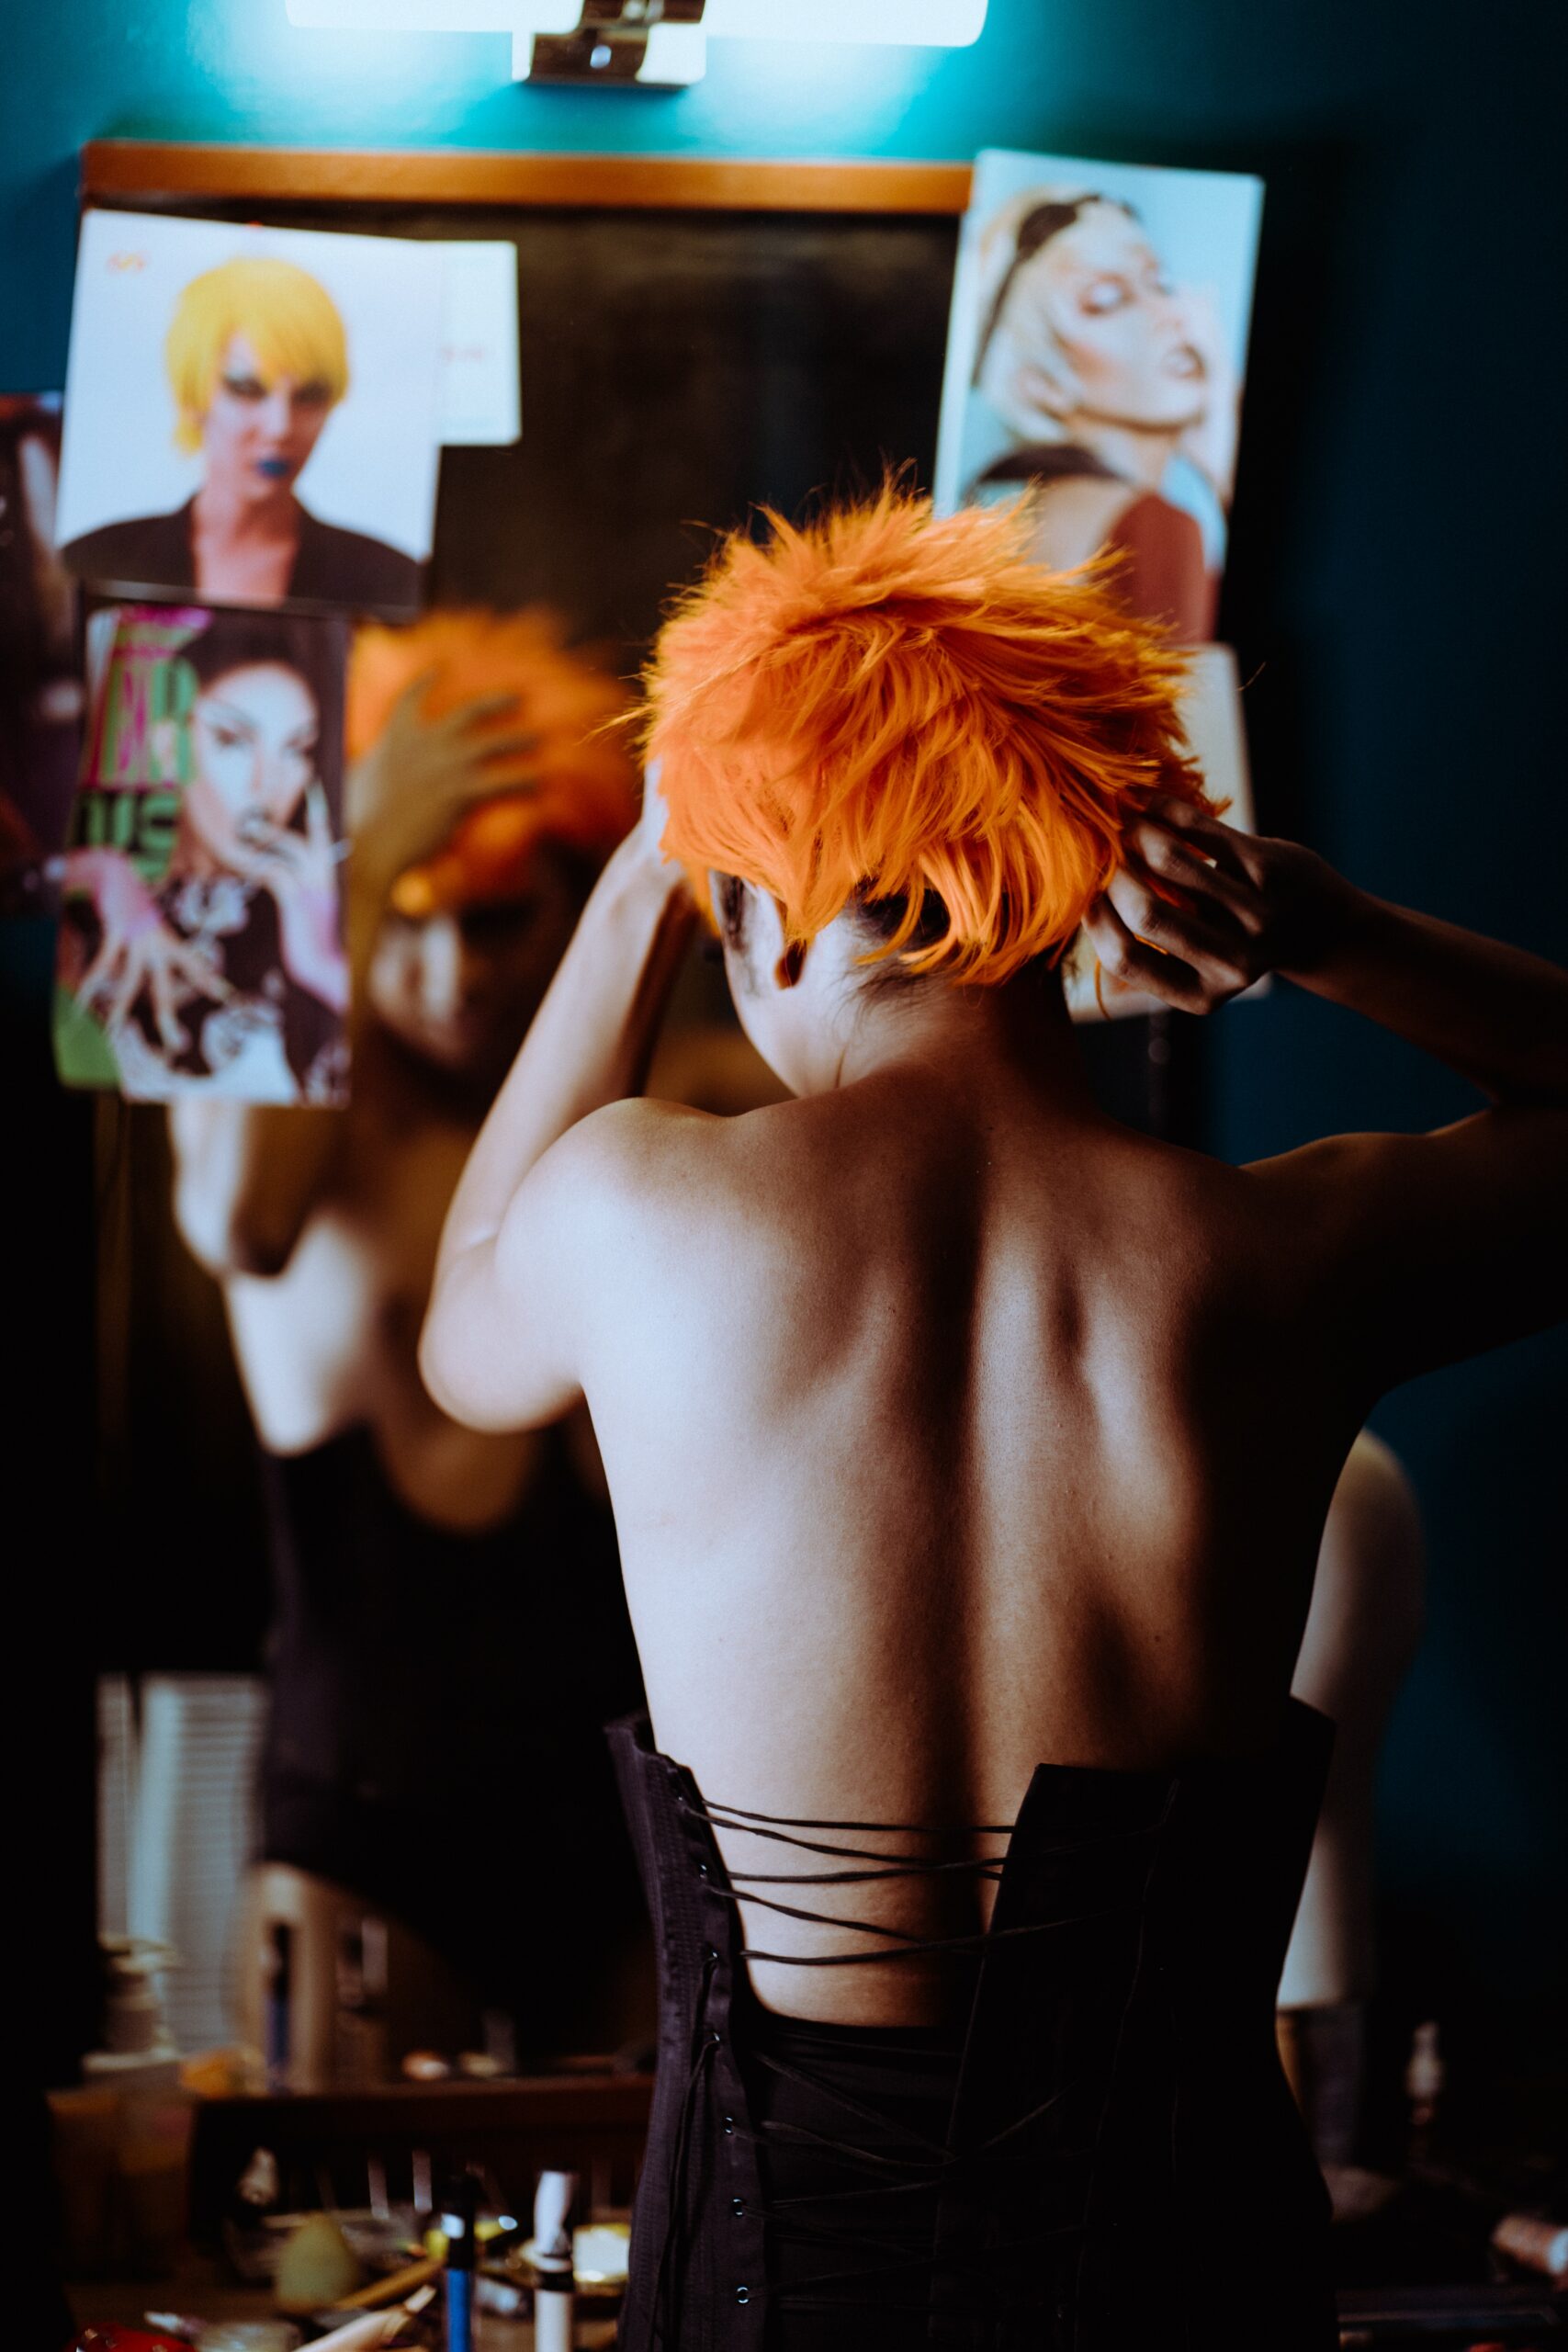 the image shows a person adjusting an orange wig on their head in front of a mirror.